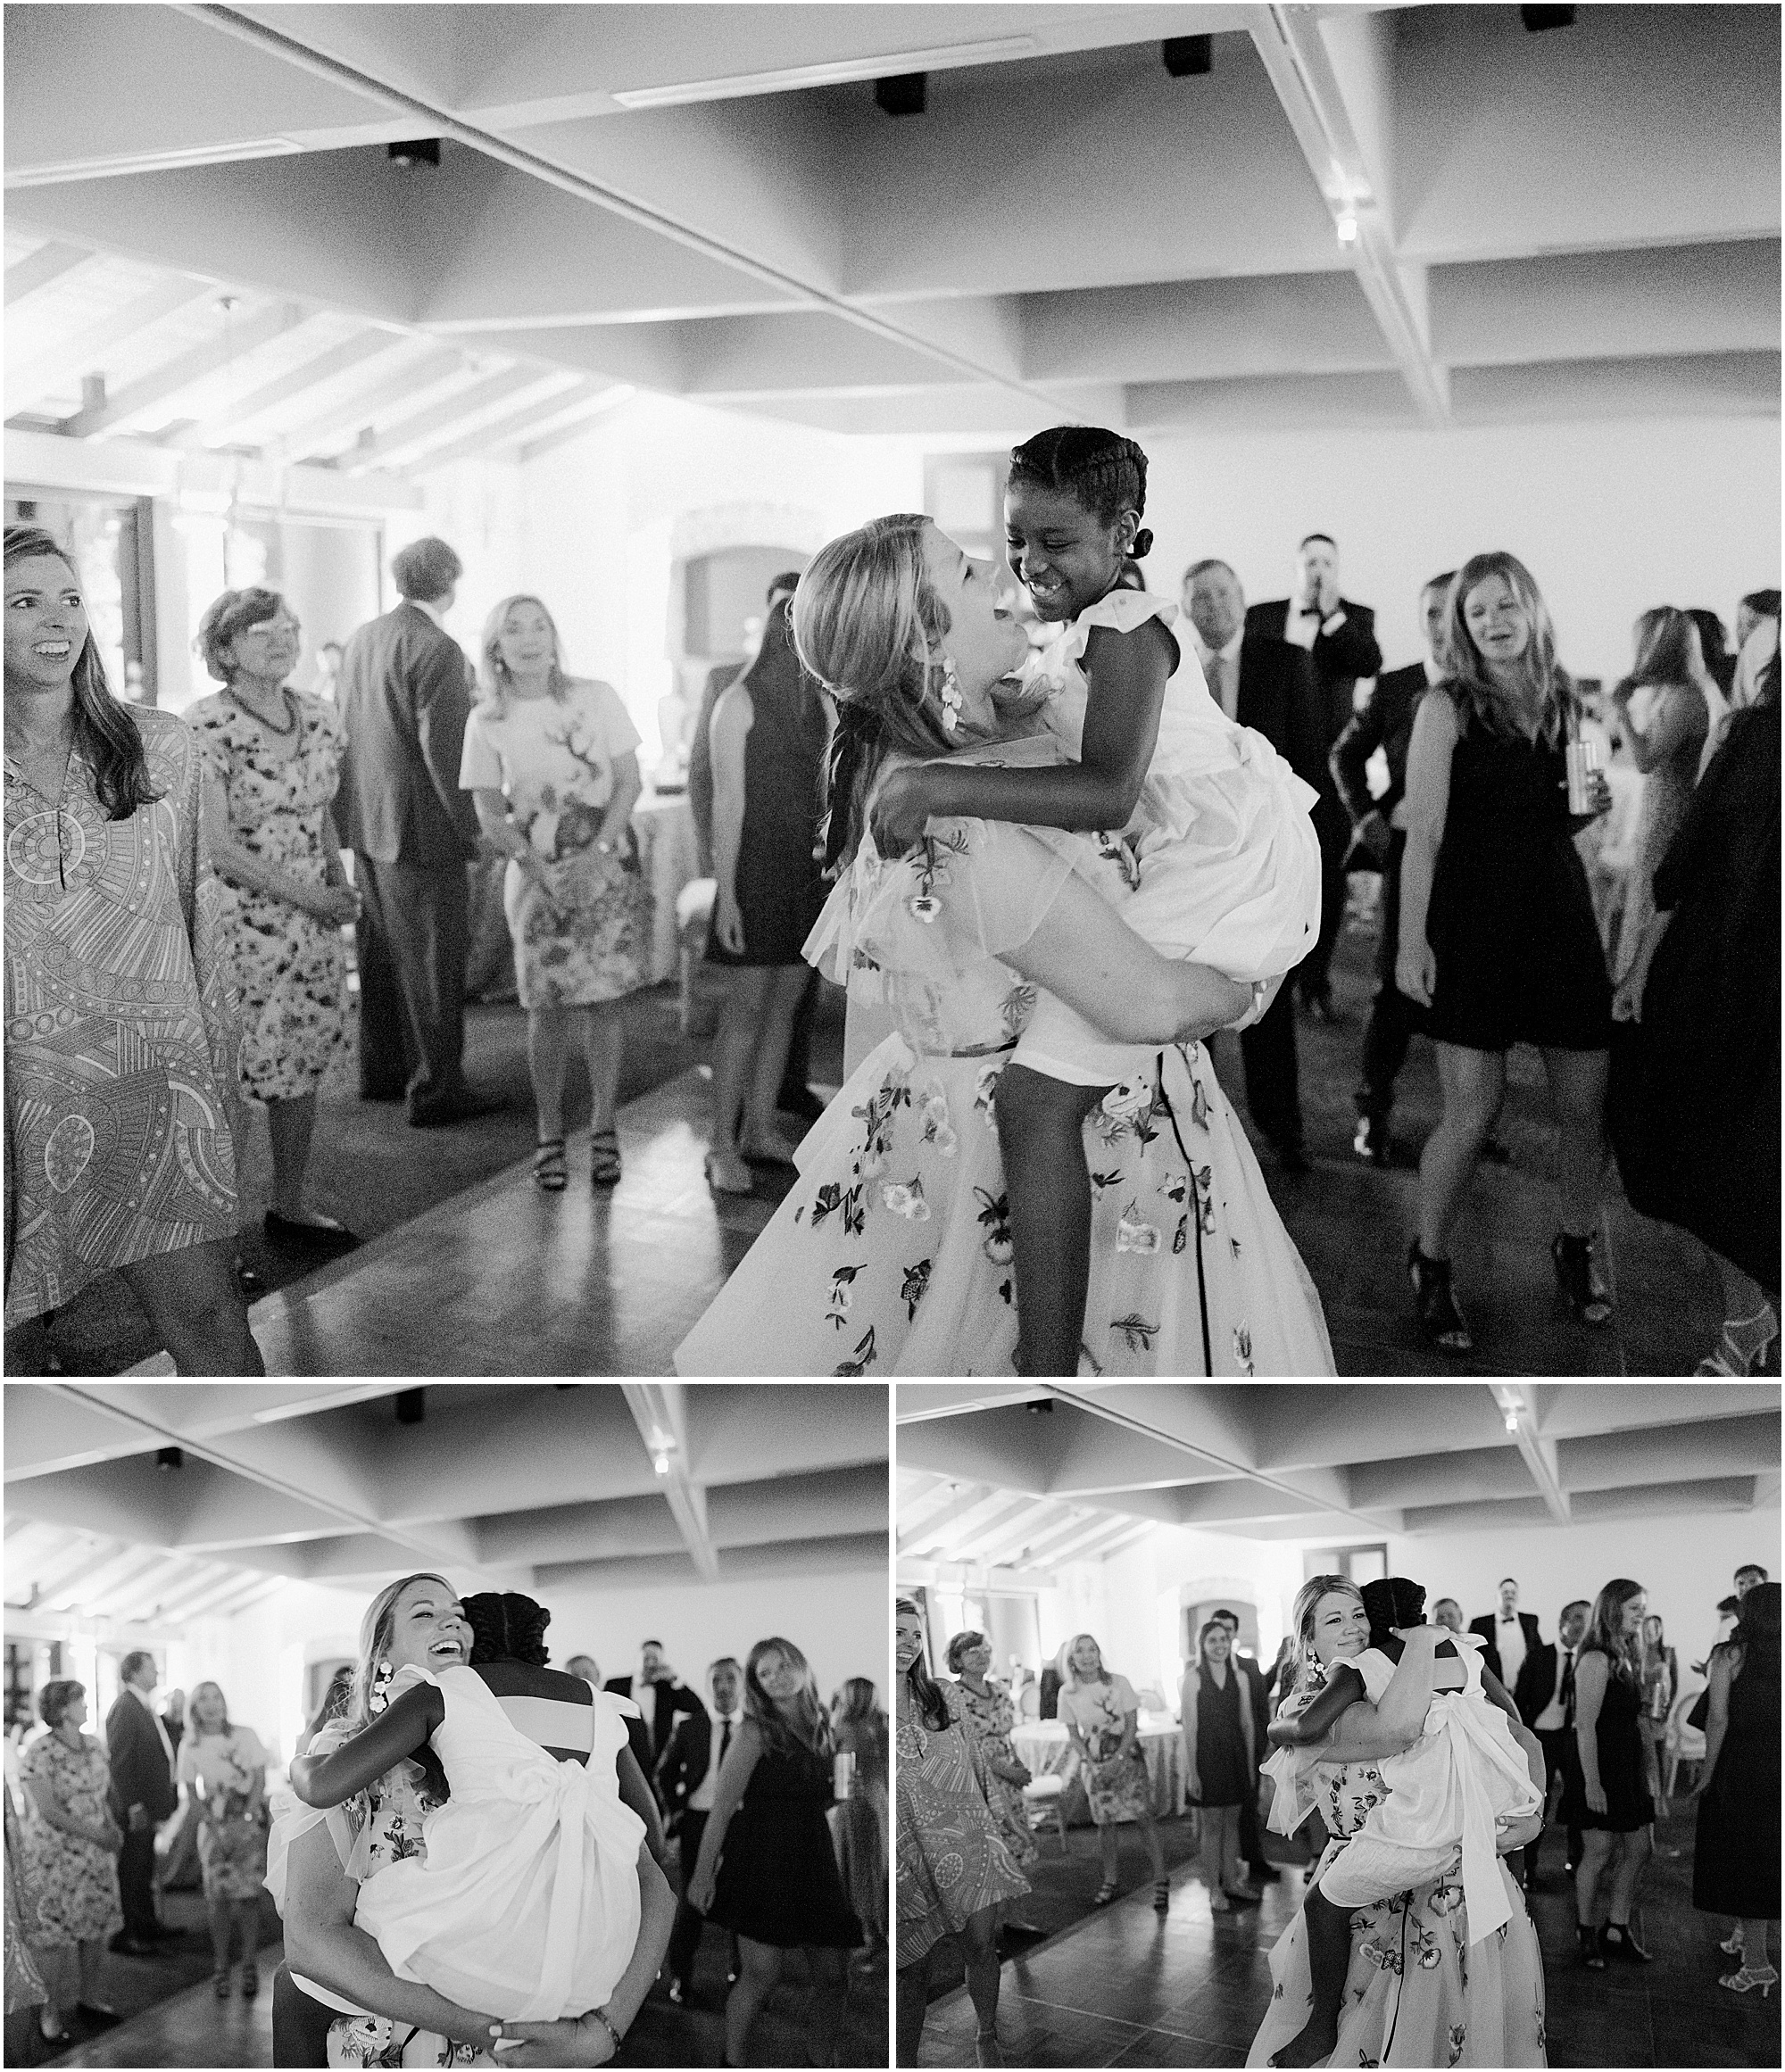 Bride dancing with flower girl in black and white at wedding reception